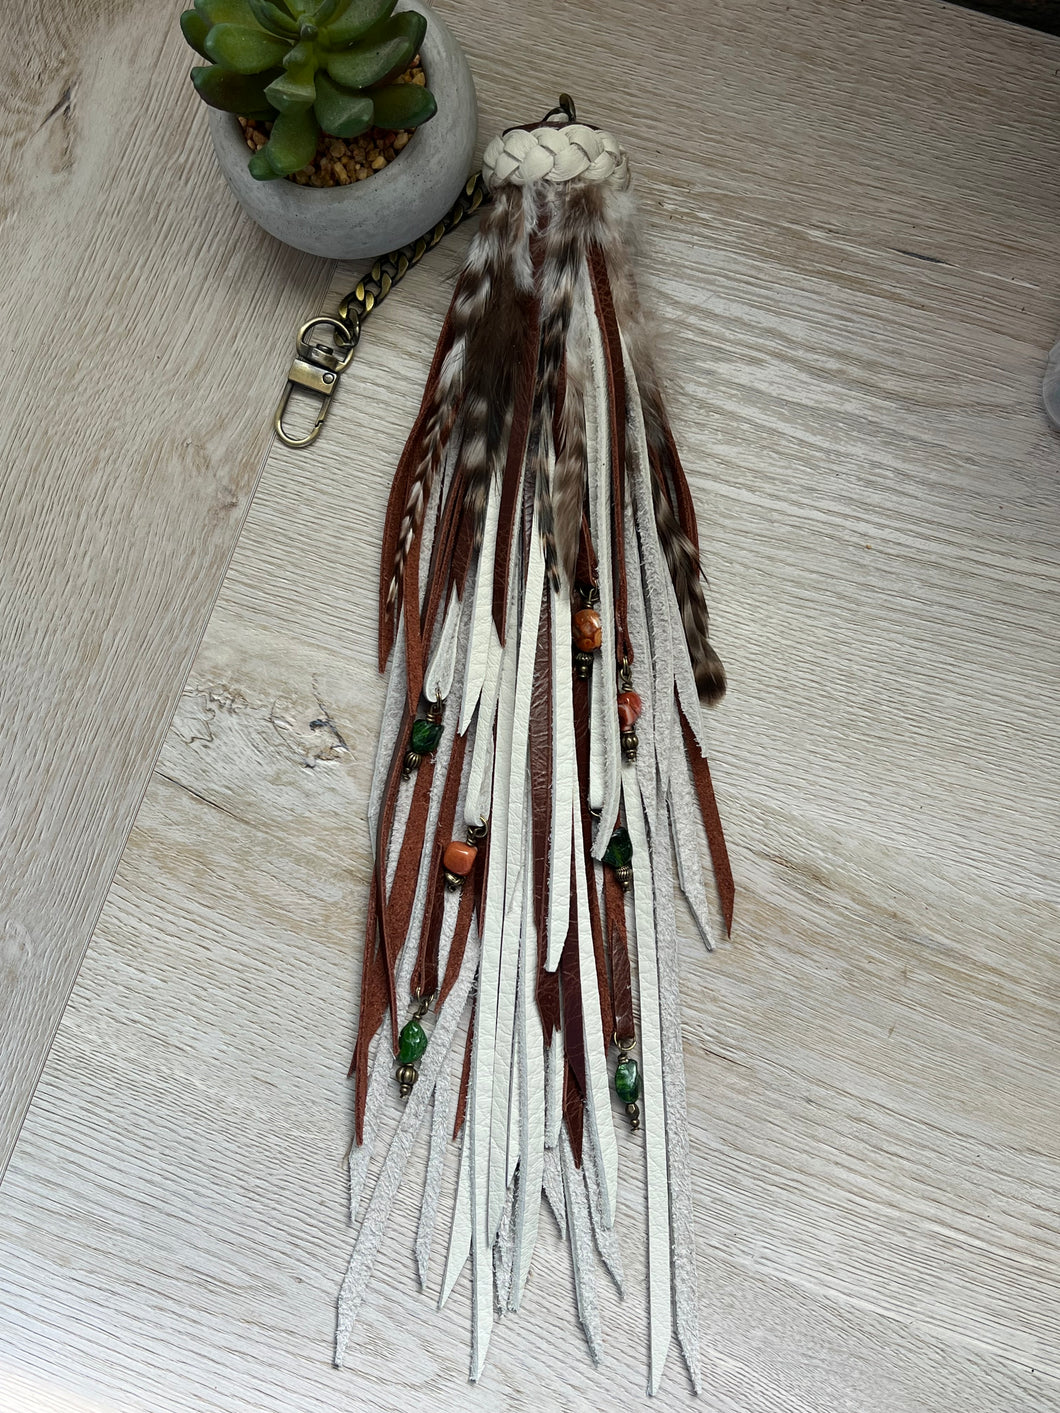 Long Clip Chain Tassel - Bone and Mocha Leather with Genuine Orange Carnelian and Green Seraphinite Beaded Charms and Feather Accents